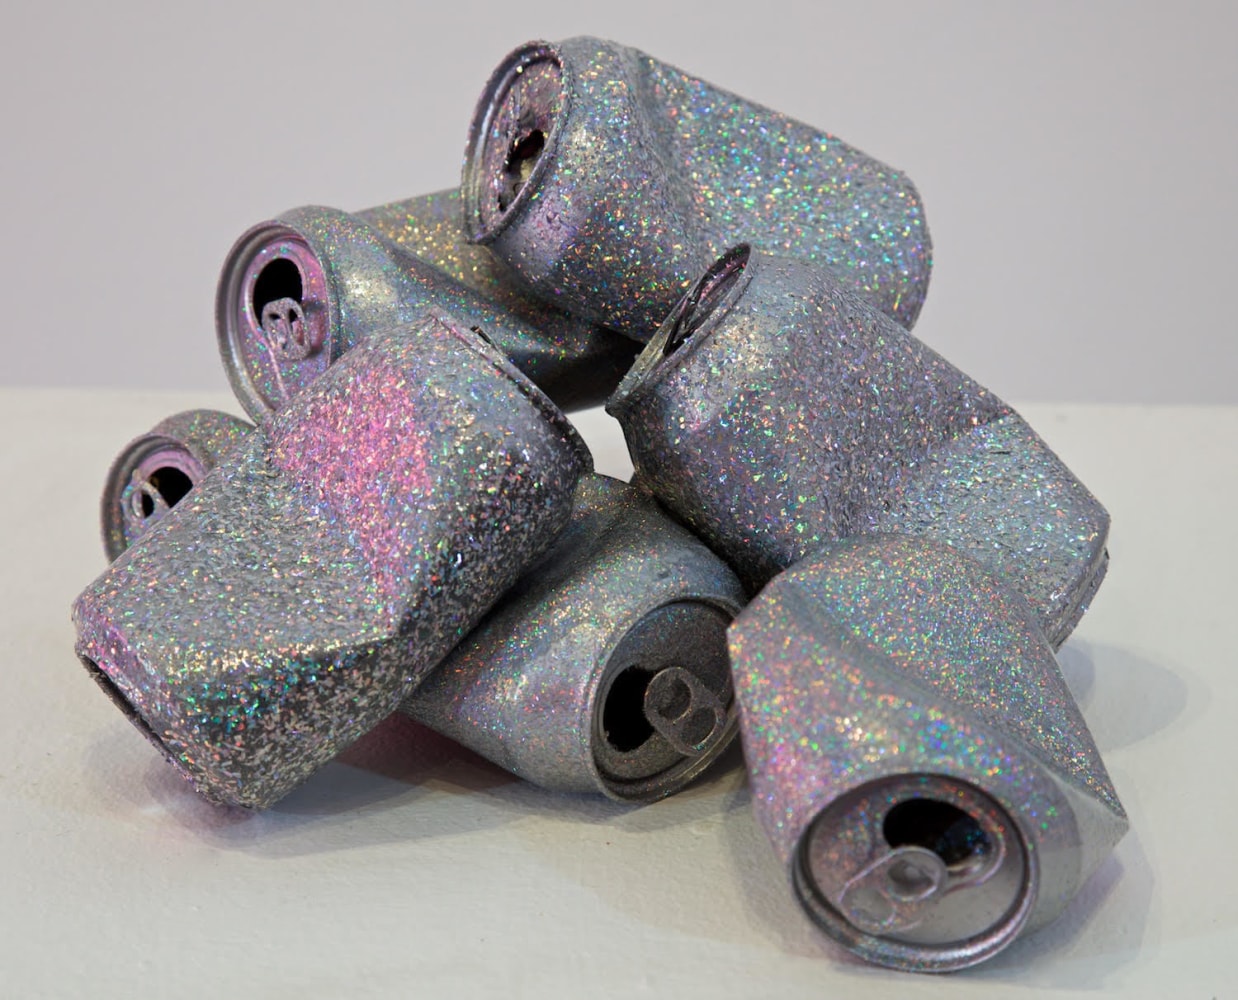 Sadie Barnette
Untitled (Can) (Silver), 2018
Metal flake on found cans&amp;nbsp;
5 x 3 x 3 inches (each)